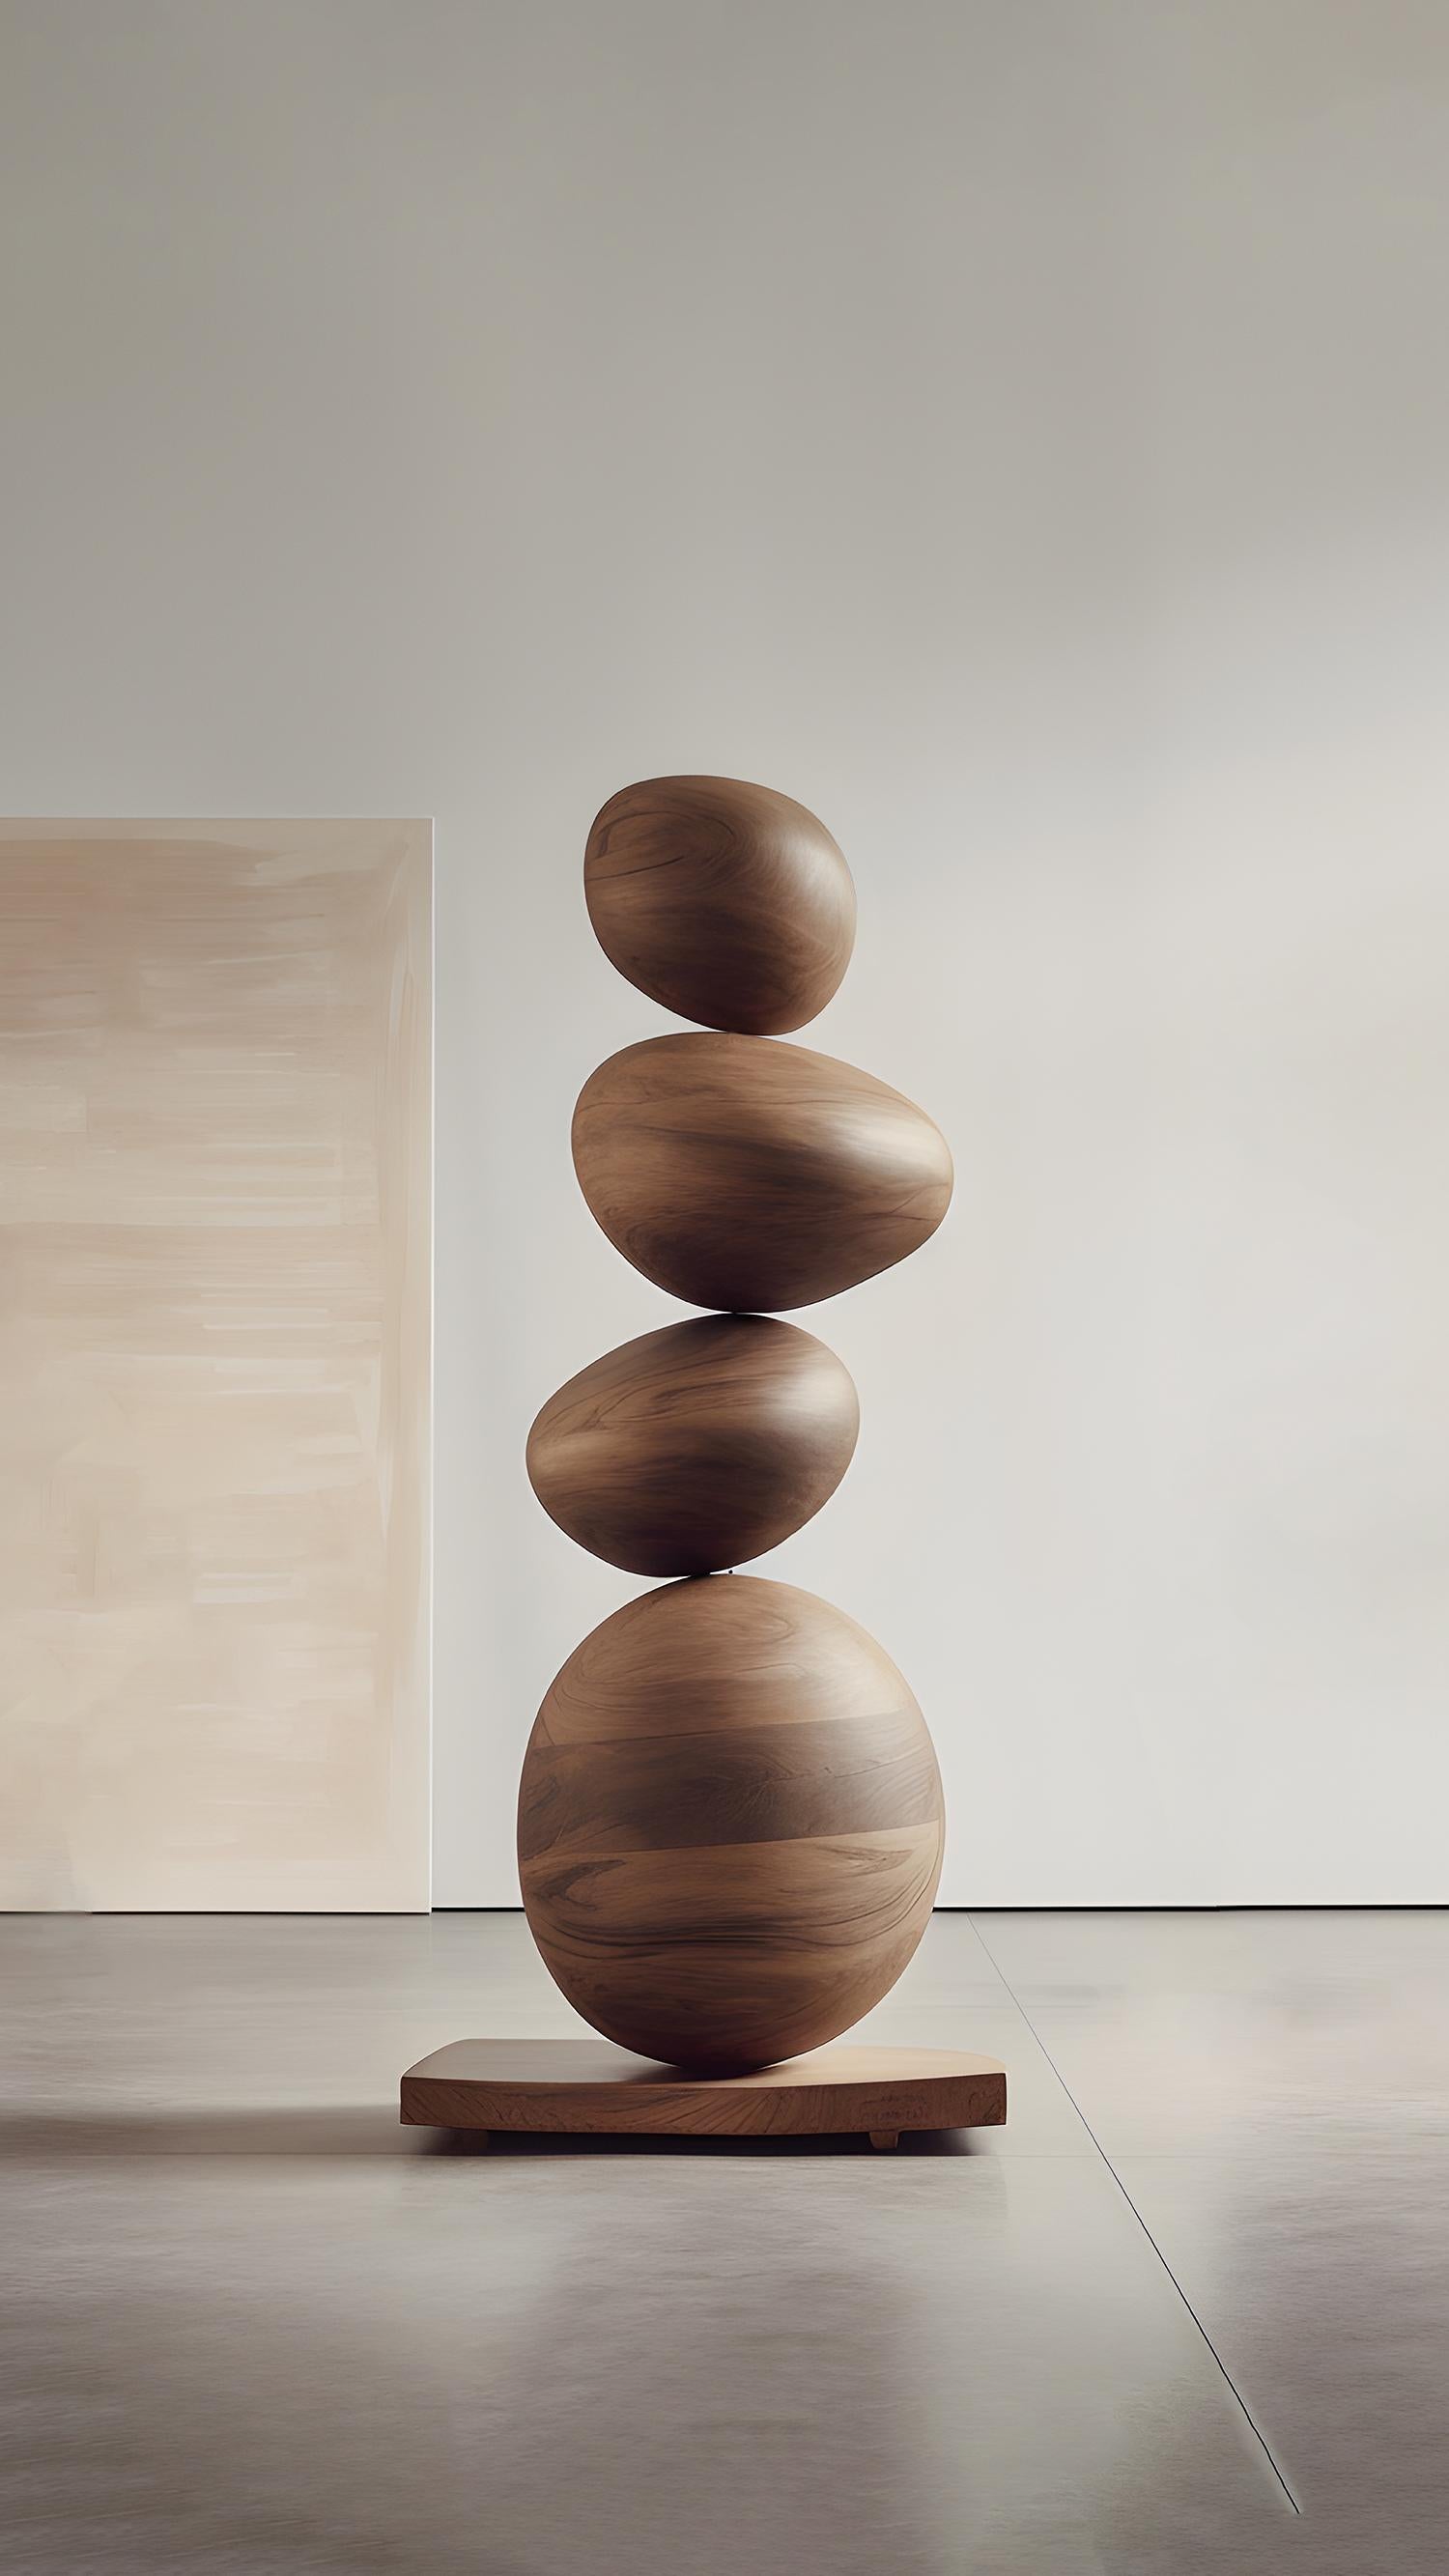 “Still Stand” sculptures by Joel Escalona

Joel Escalona's wooden standing sculptures are objects of raw beauty and serene grace. Each one is a testament to the power of the material, with smooth curves that flow into one another, inviting the